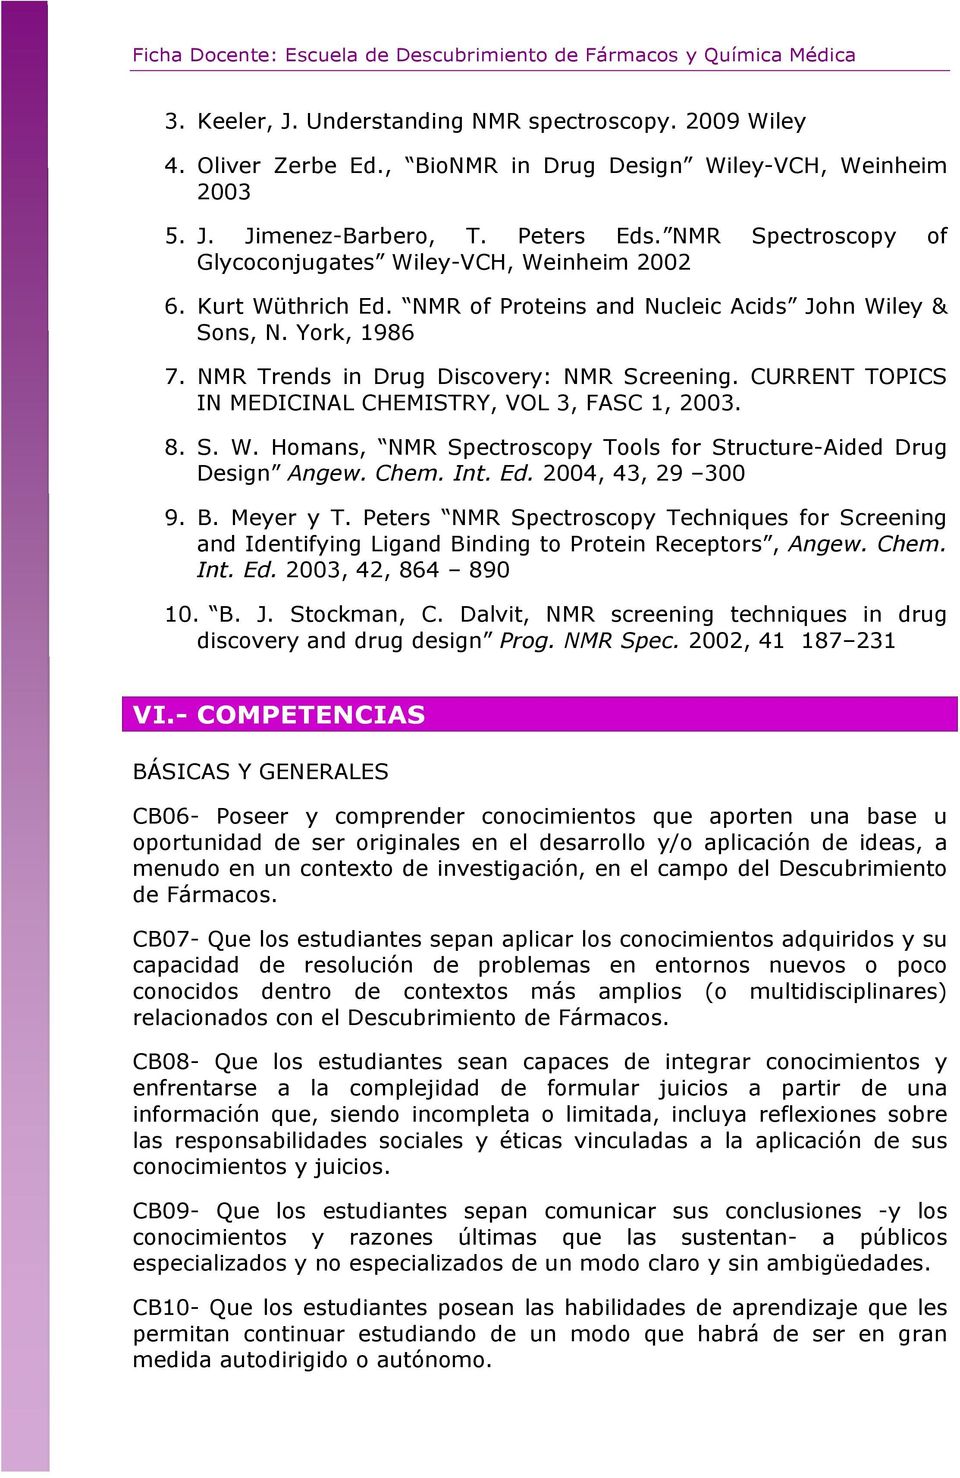 CURRENT TOPICS IN MEDICINAL CHEMISTRY, VOL 3, FASC 1, 2003. 8. S. W. Homans, NMR Spectroscopy Tools for Structure-Aided Drug Design Angew. Chem. Int. Ed. 2004, 43, 29 300 9. B. Meyer y T.